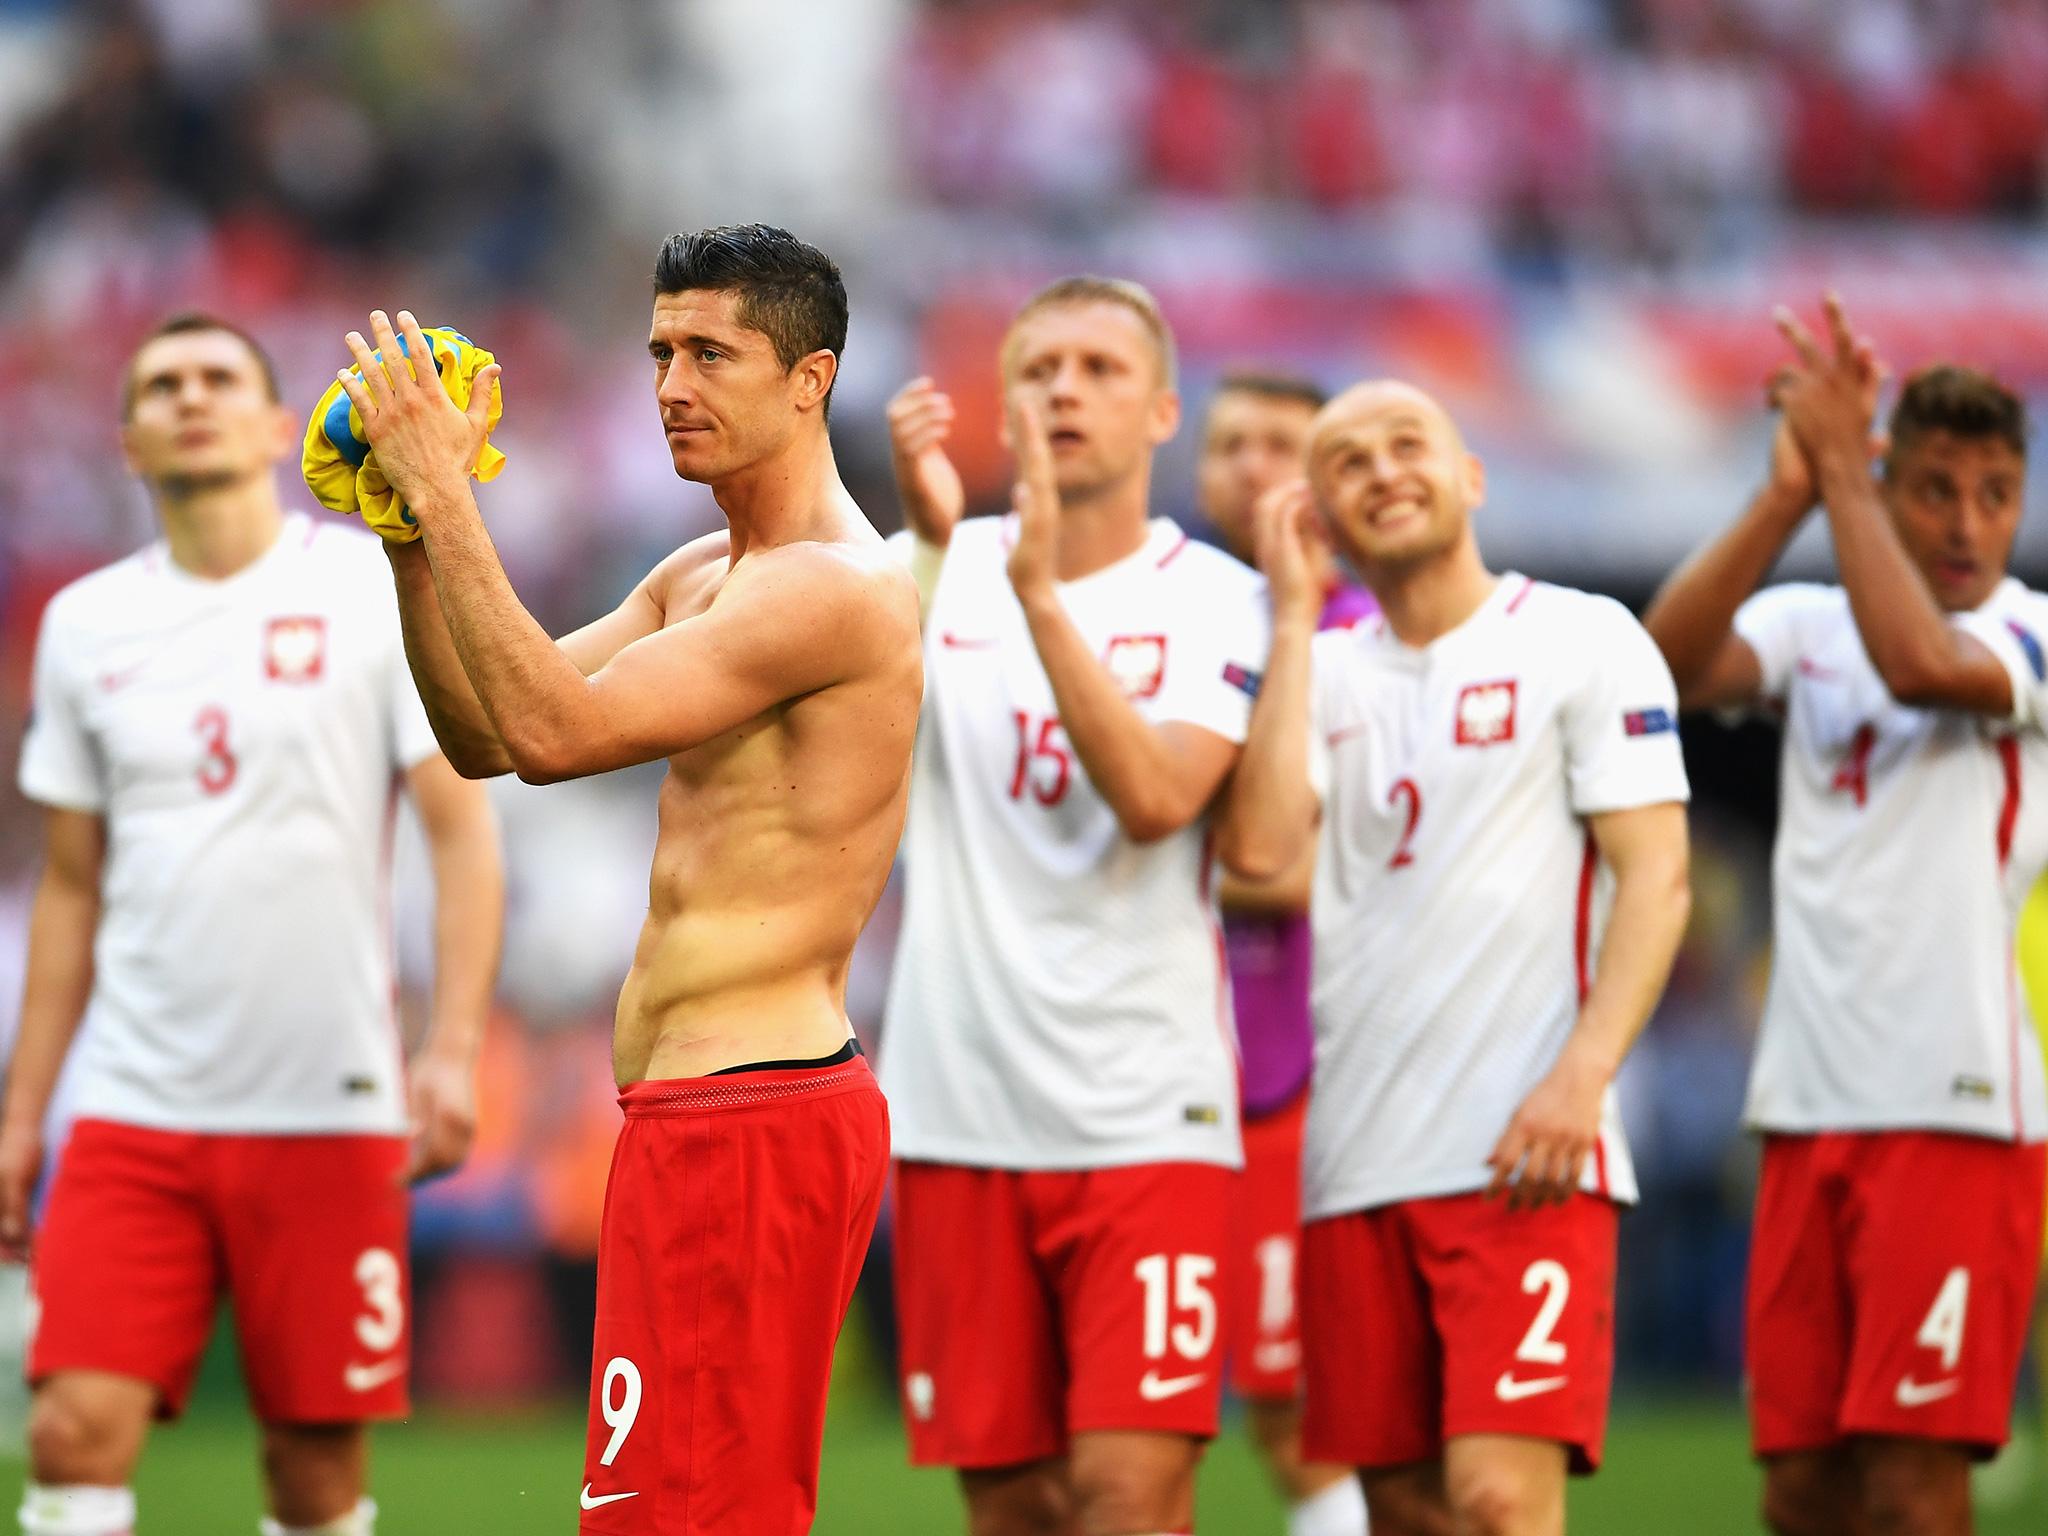 Lewandowski, one of the world's best strikers, is yet to score at this tournament